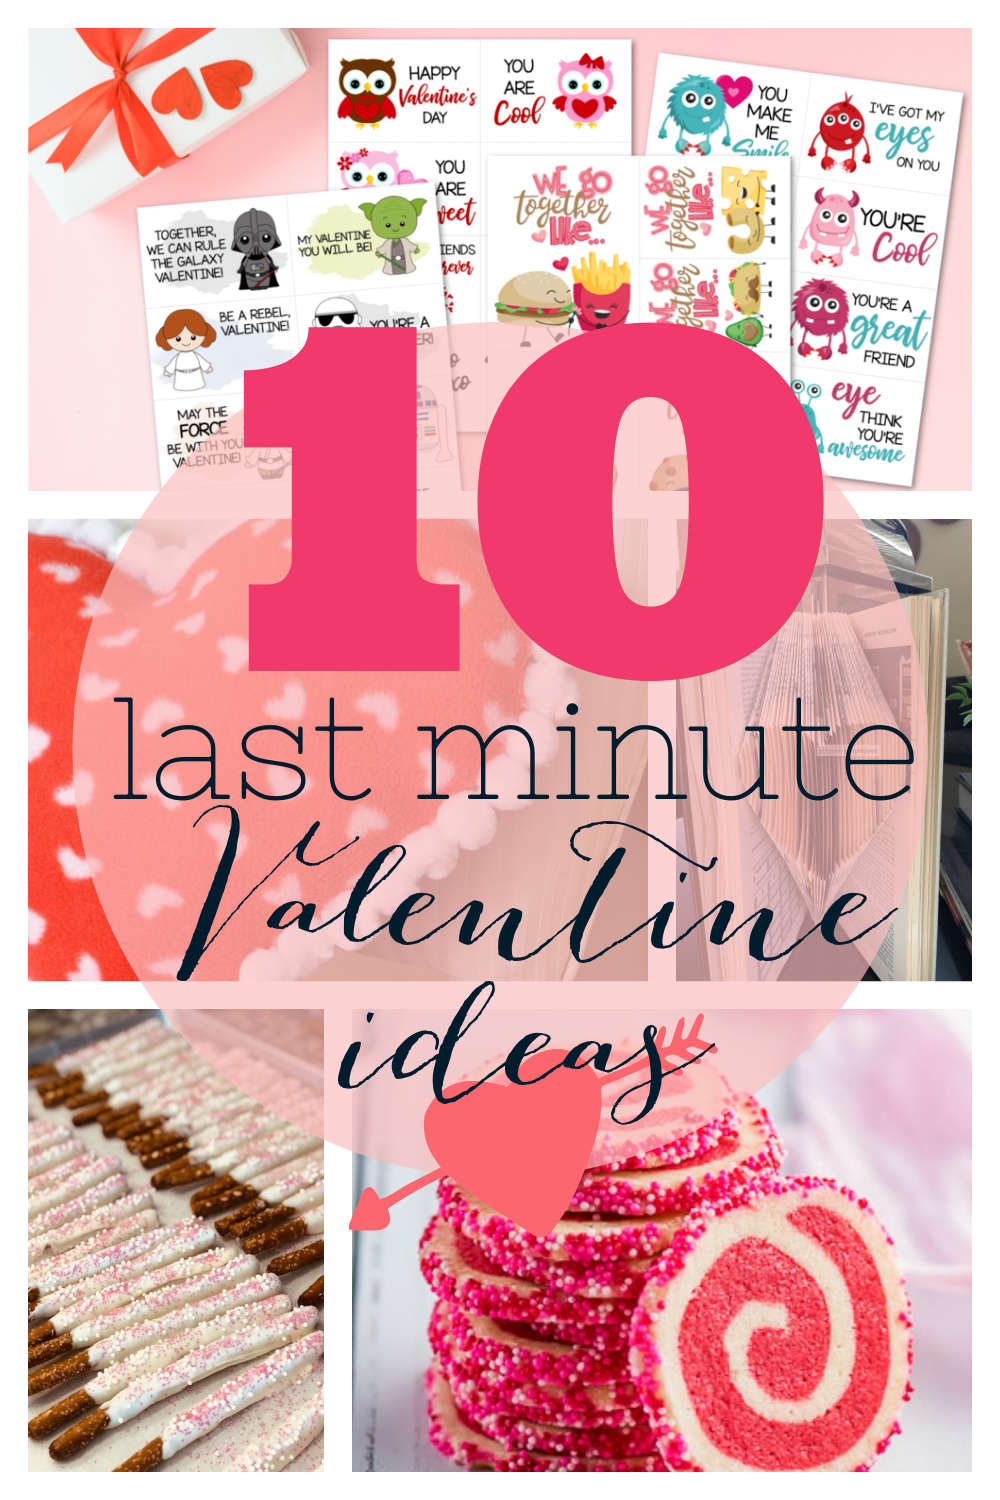 10 Last Minute Valentine Ideas at GingerSnapCrafts.com #valentines #hearts #crafts.png